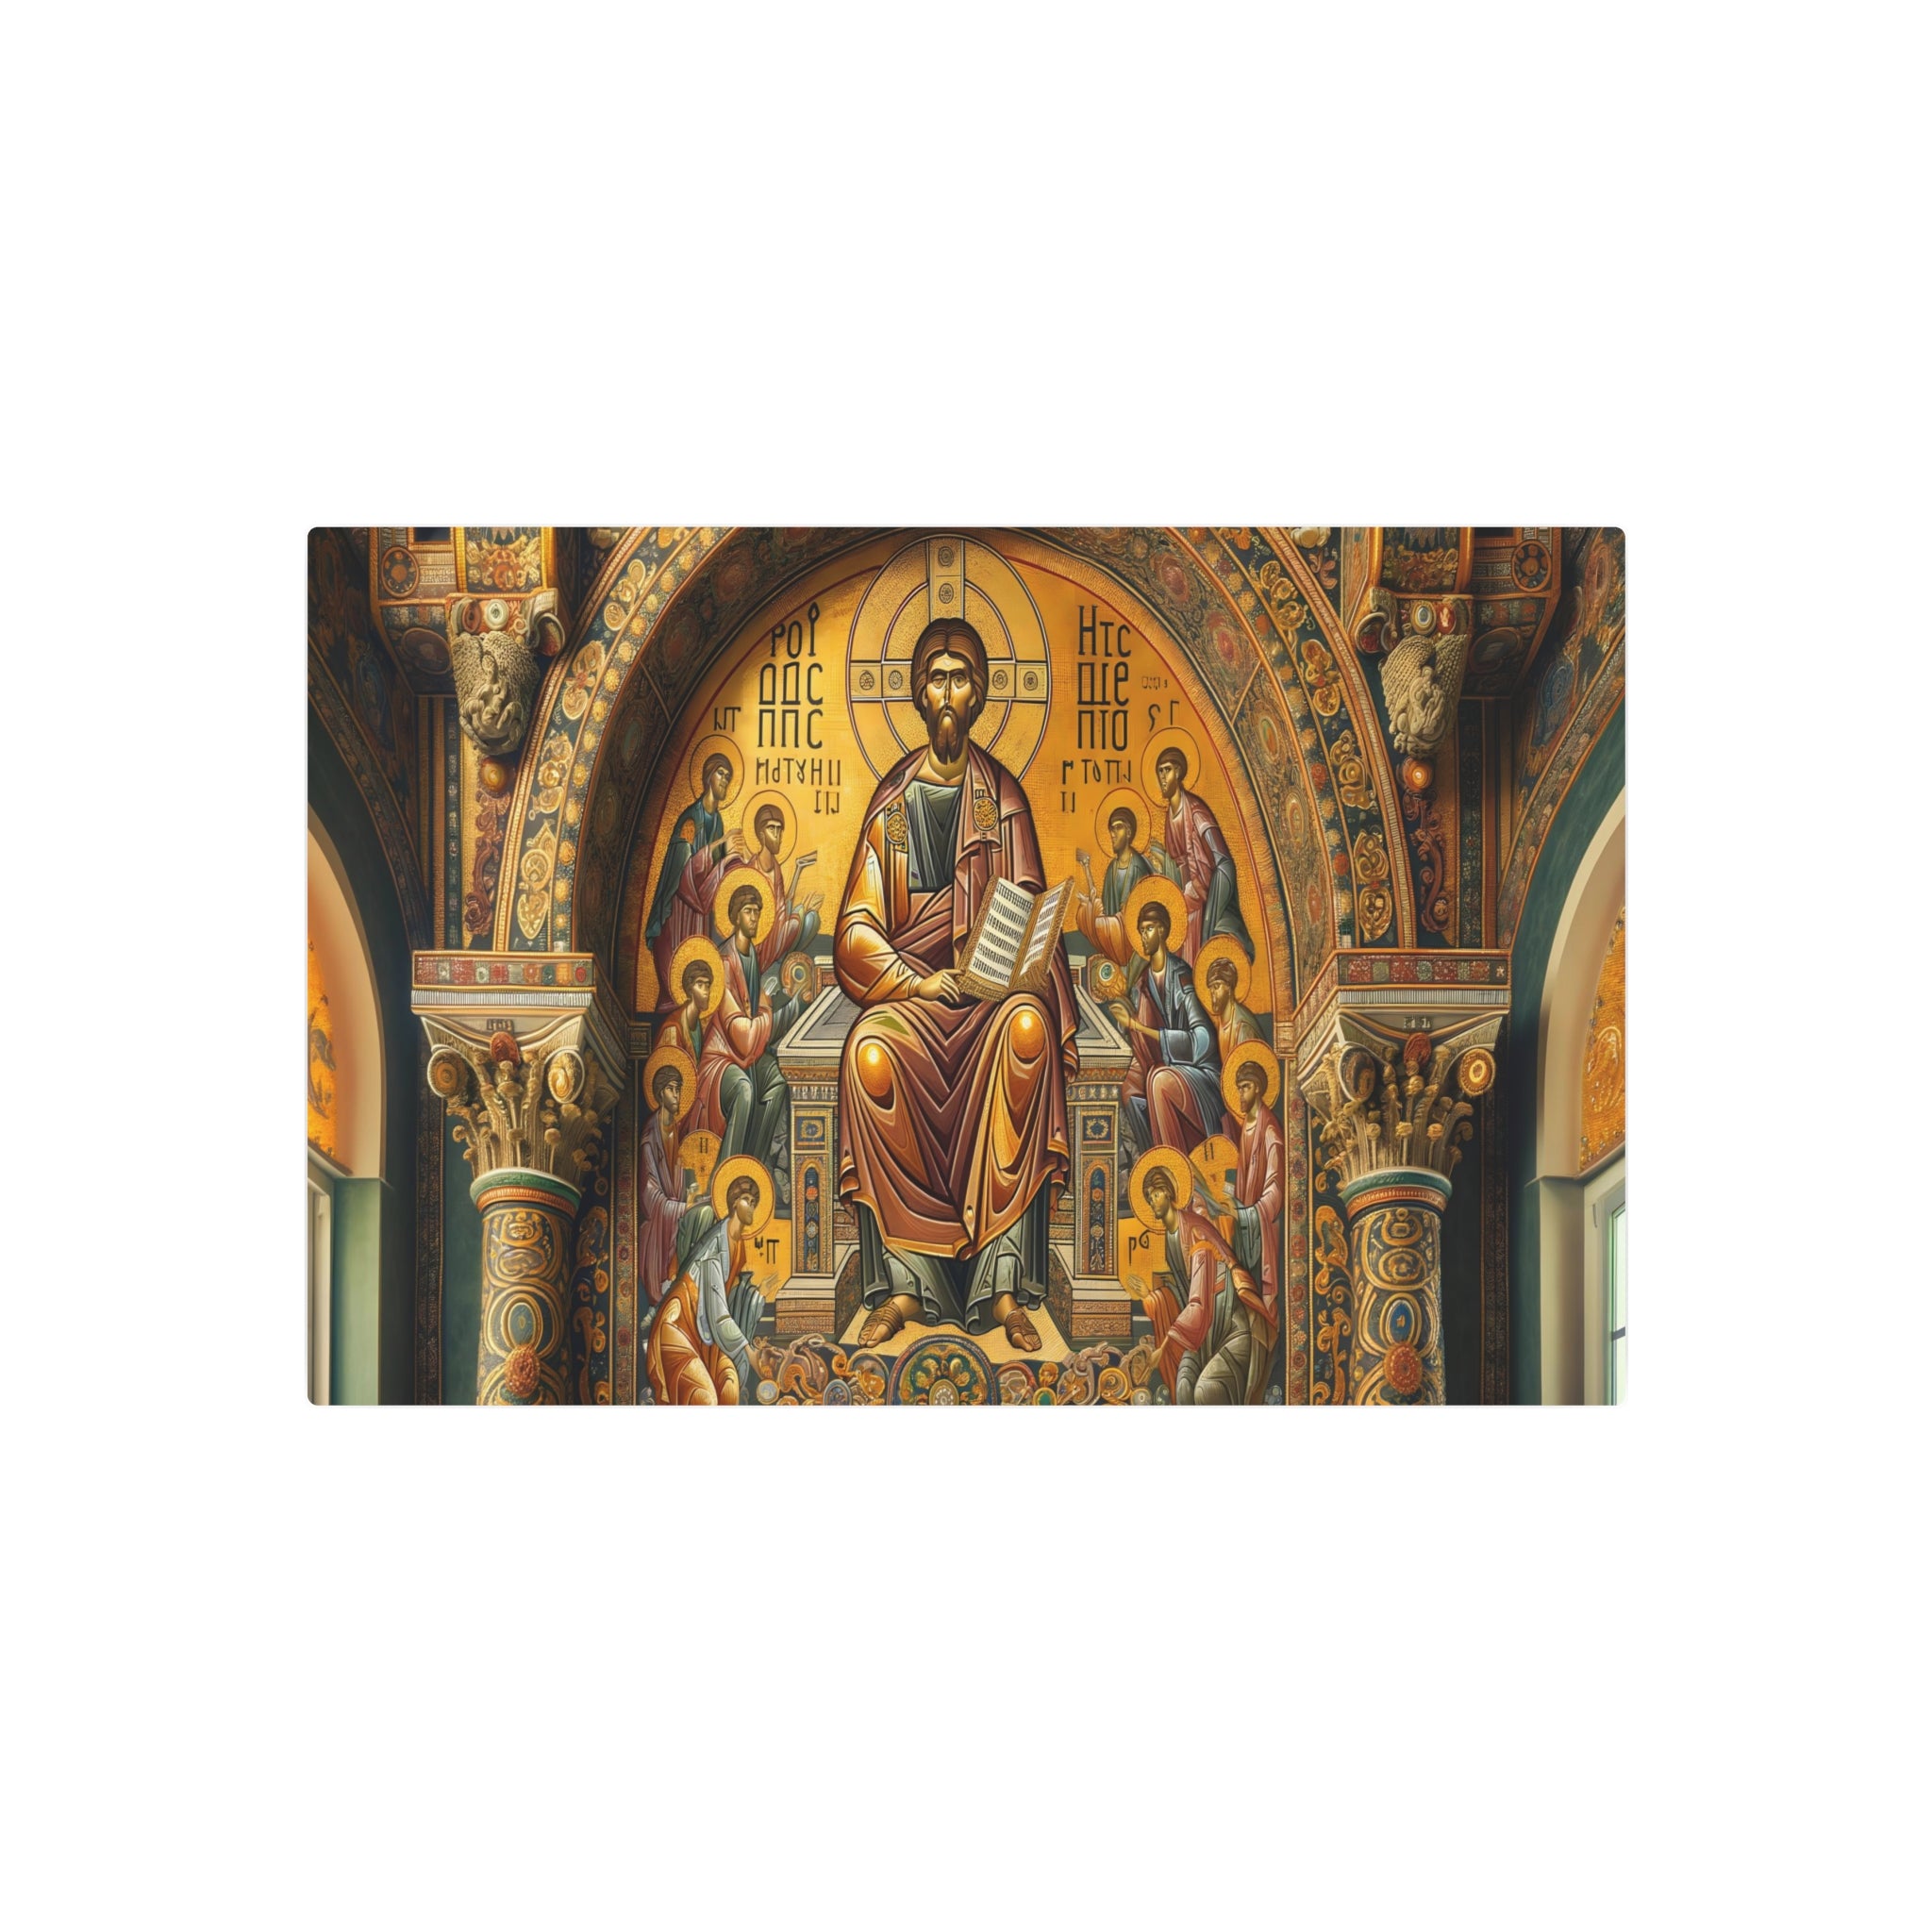 Metal Poster Art | "Byzantine Style Artwork with Elaborate Details - Non-Western & Global Styles, Traditional Byzantine Color Palette"